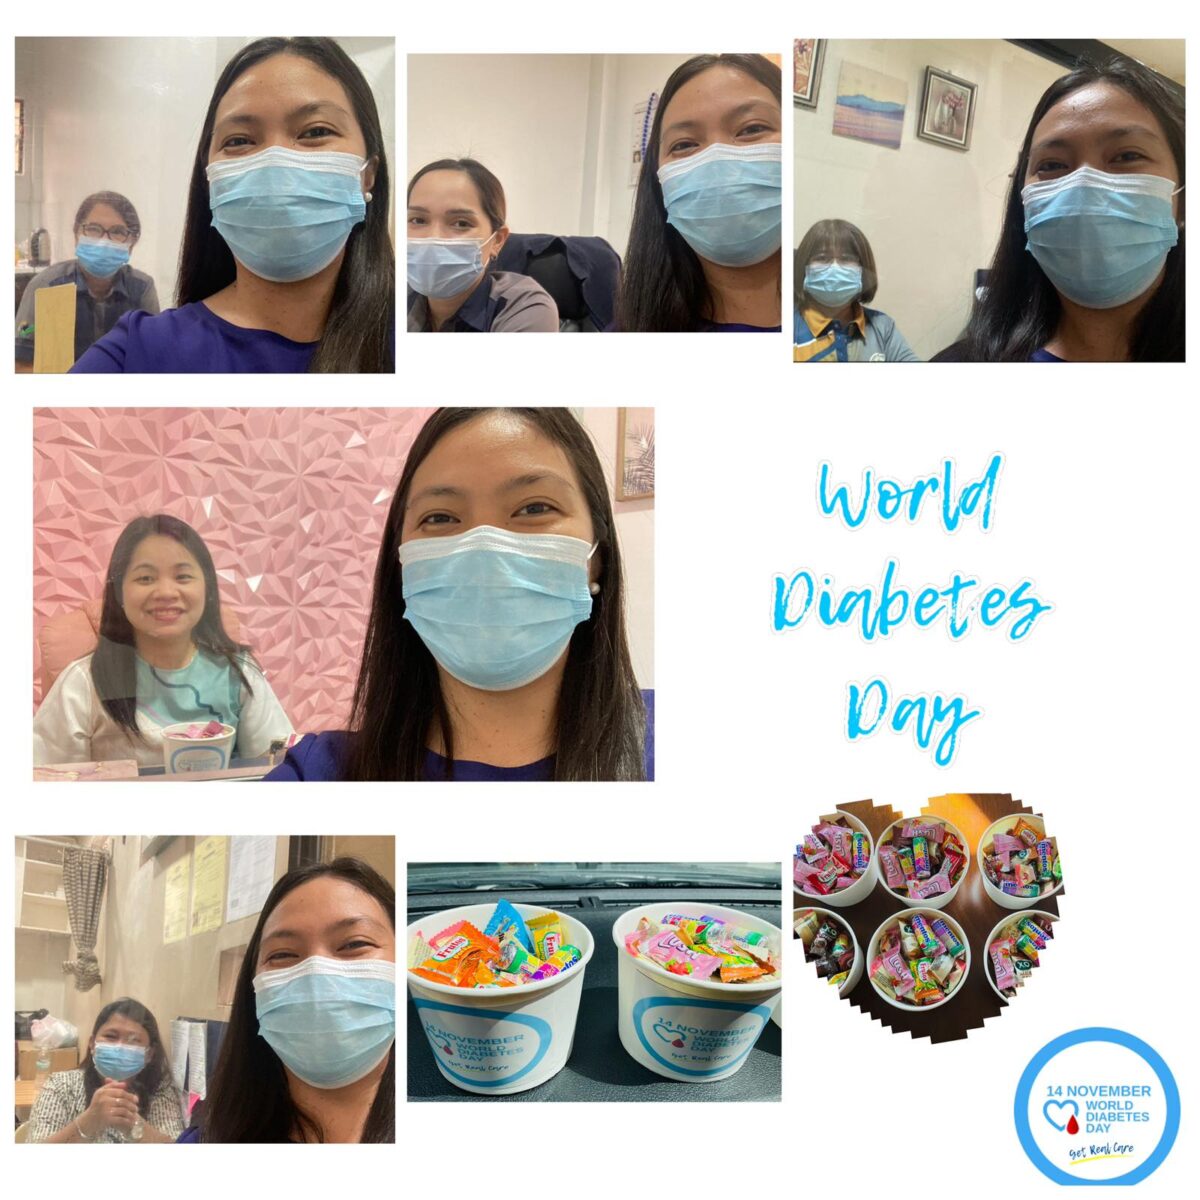 World Diabetes Day Ensuring DM Patients to GET REAL CARE